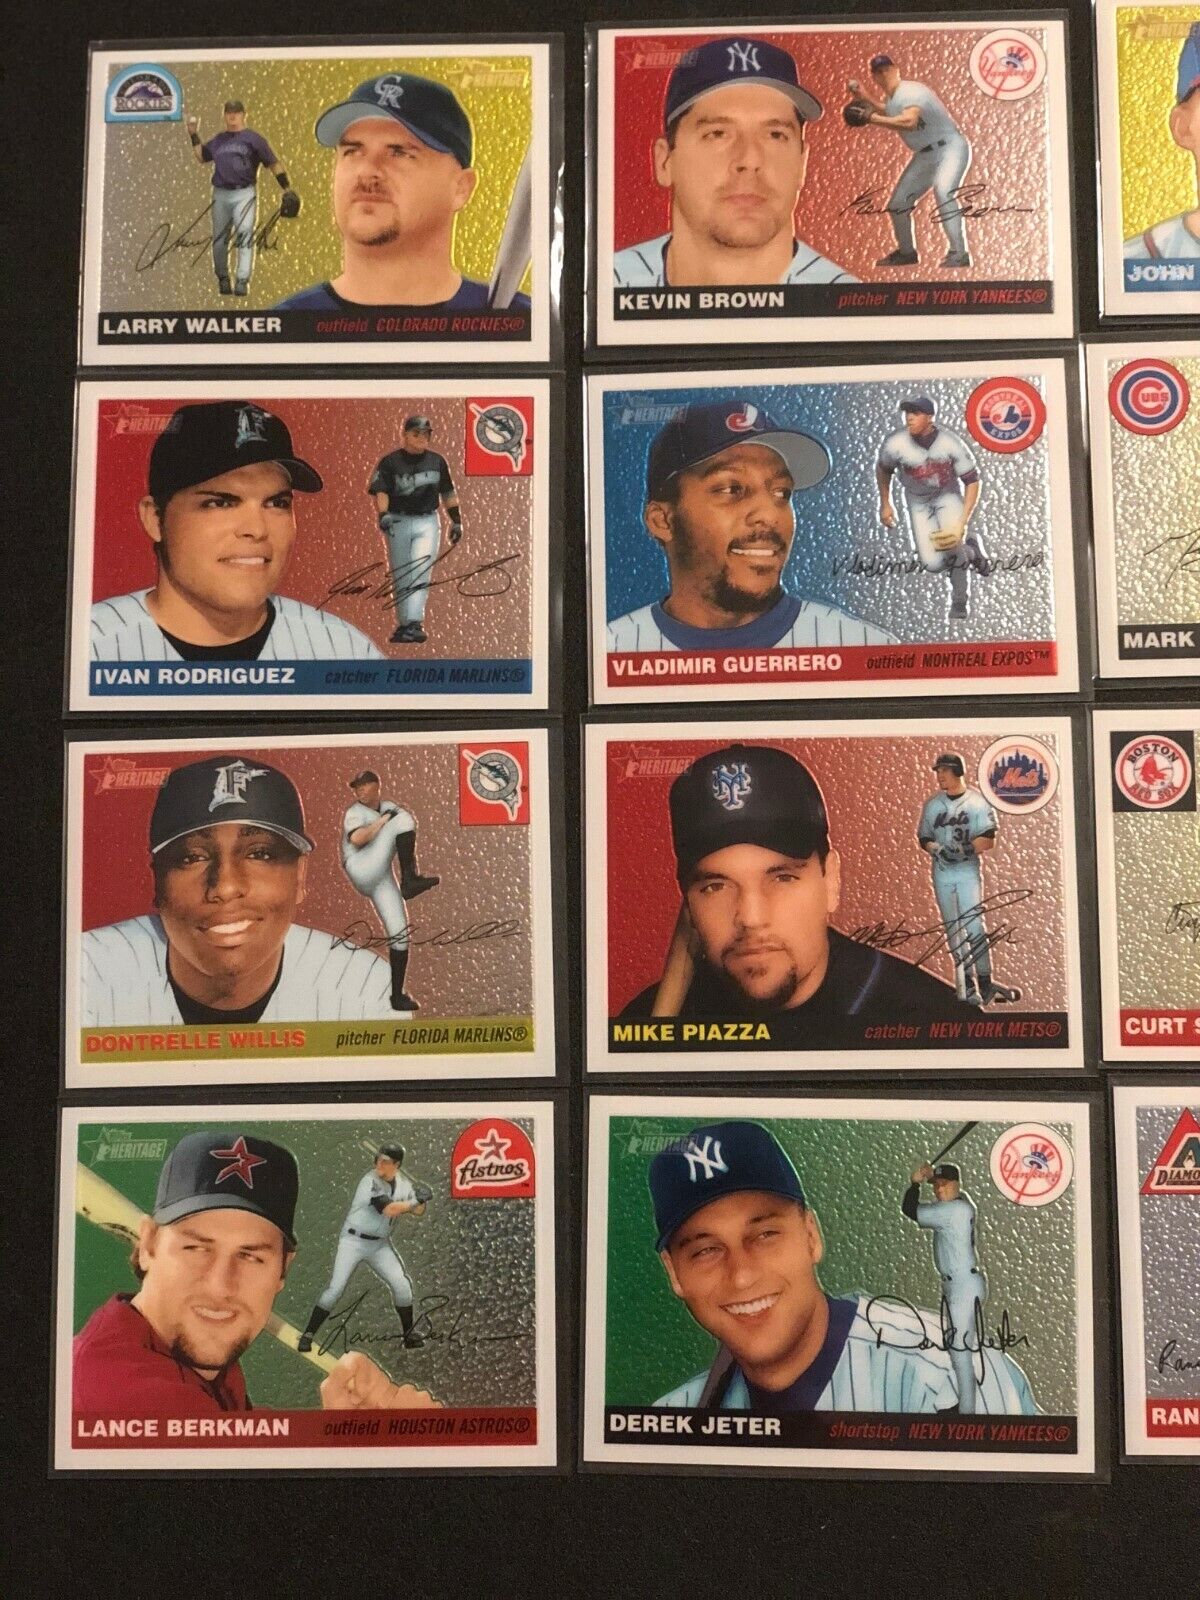 Huge Lot of 2004 Topps Heritage Chrome, Jeter, Pujols, A-rod, Piazza, Reyes, 